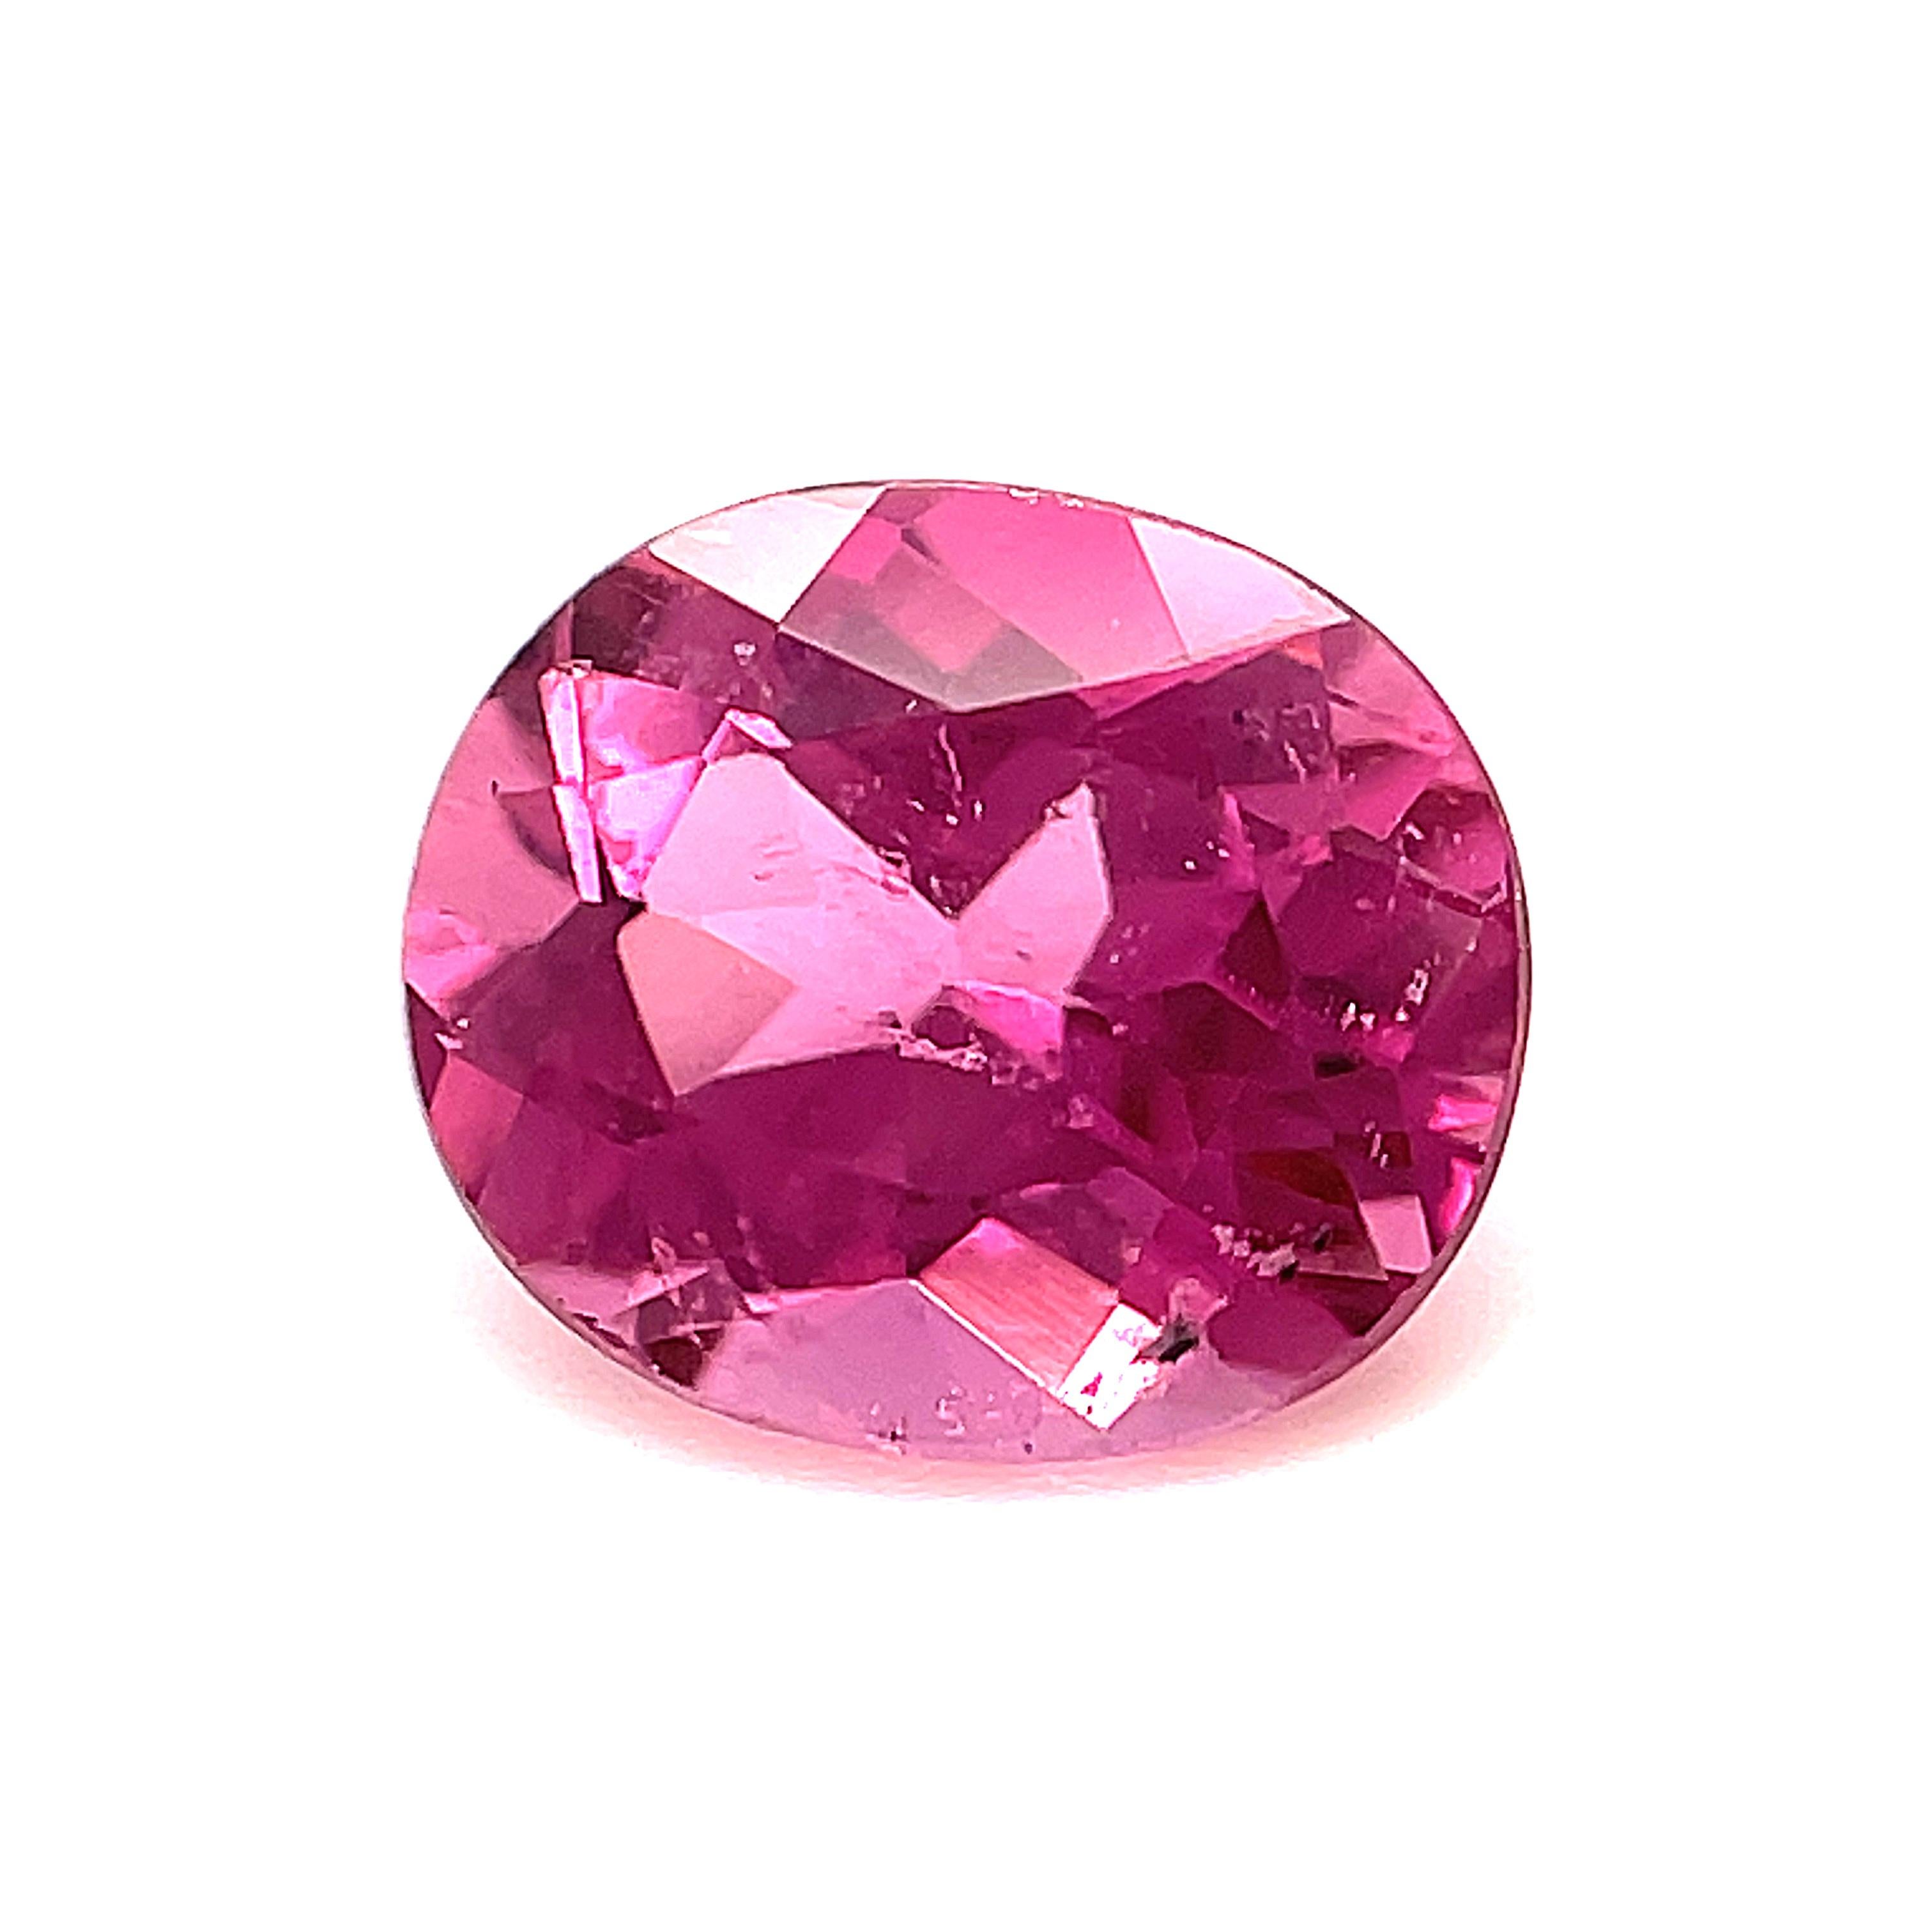 Oval Cut 1.02 Oval Unset Unmounted Loose Pink Tourmaline Gemstone For Sale